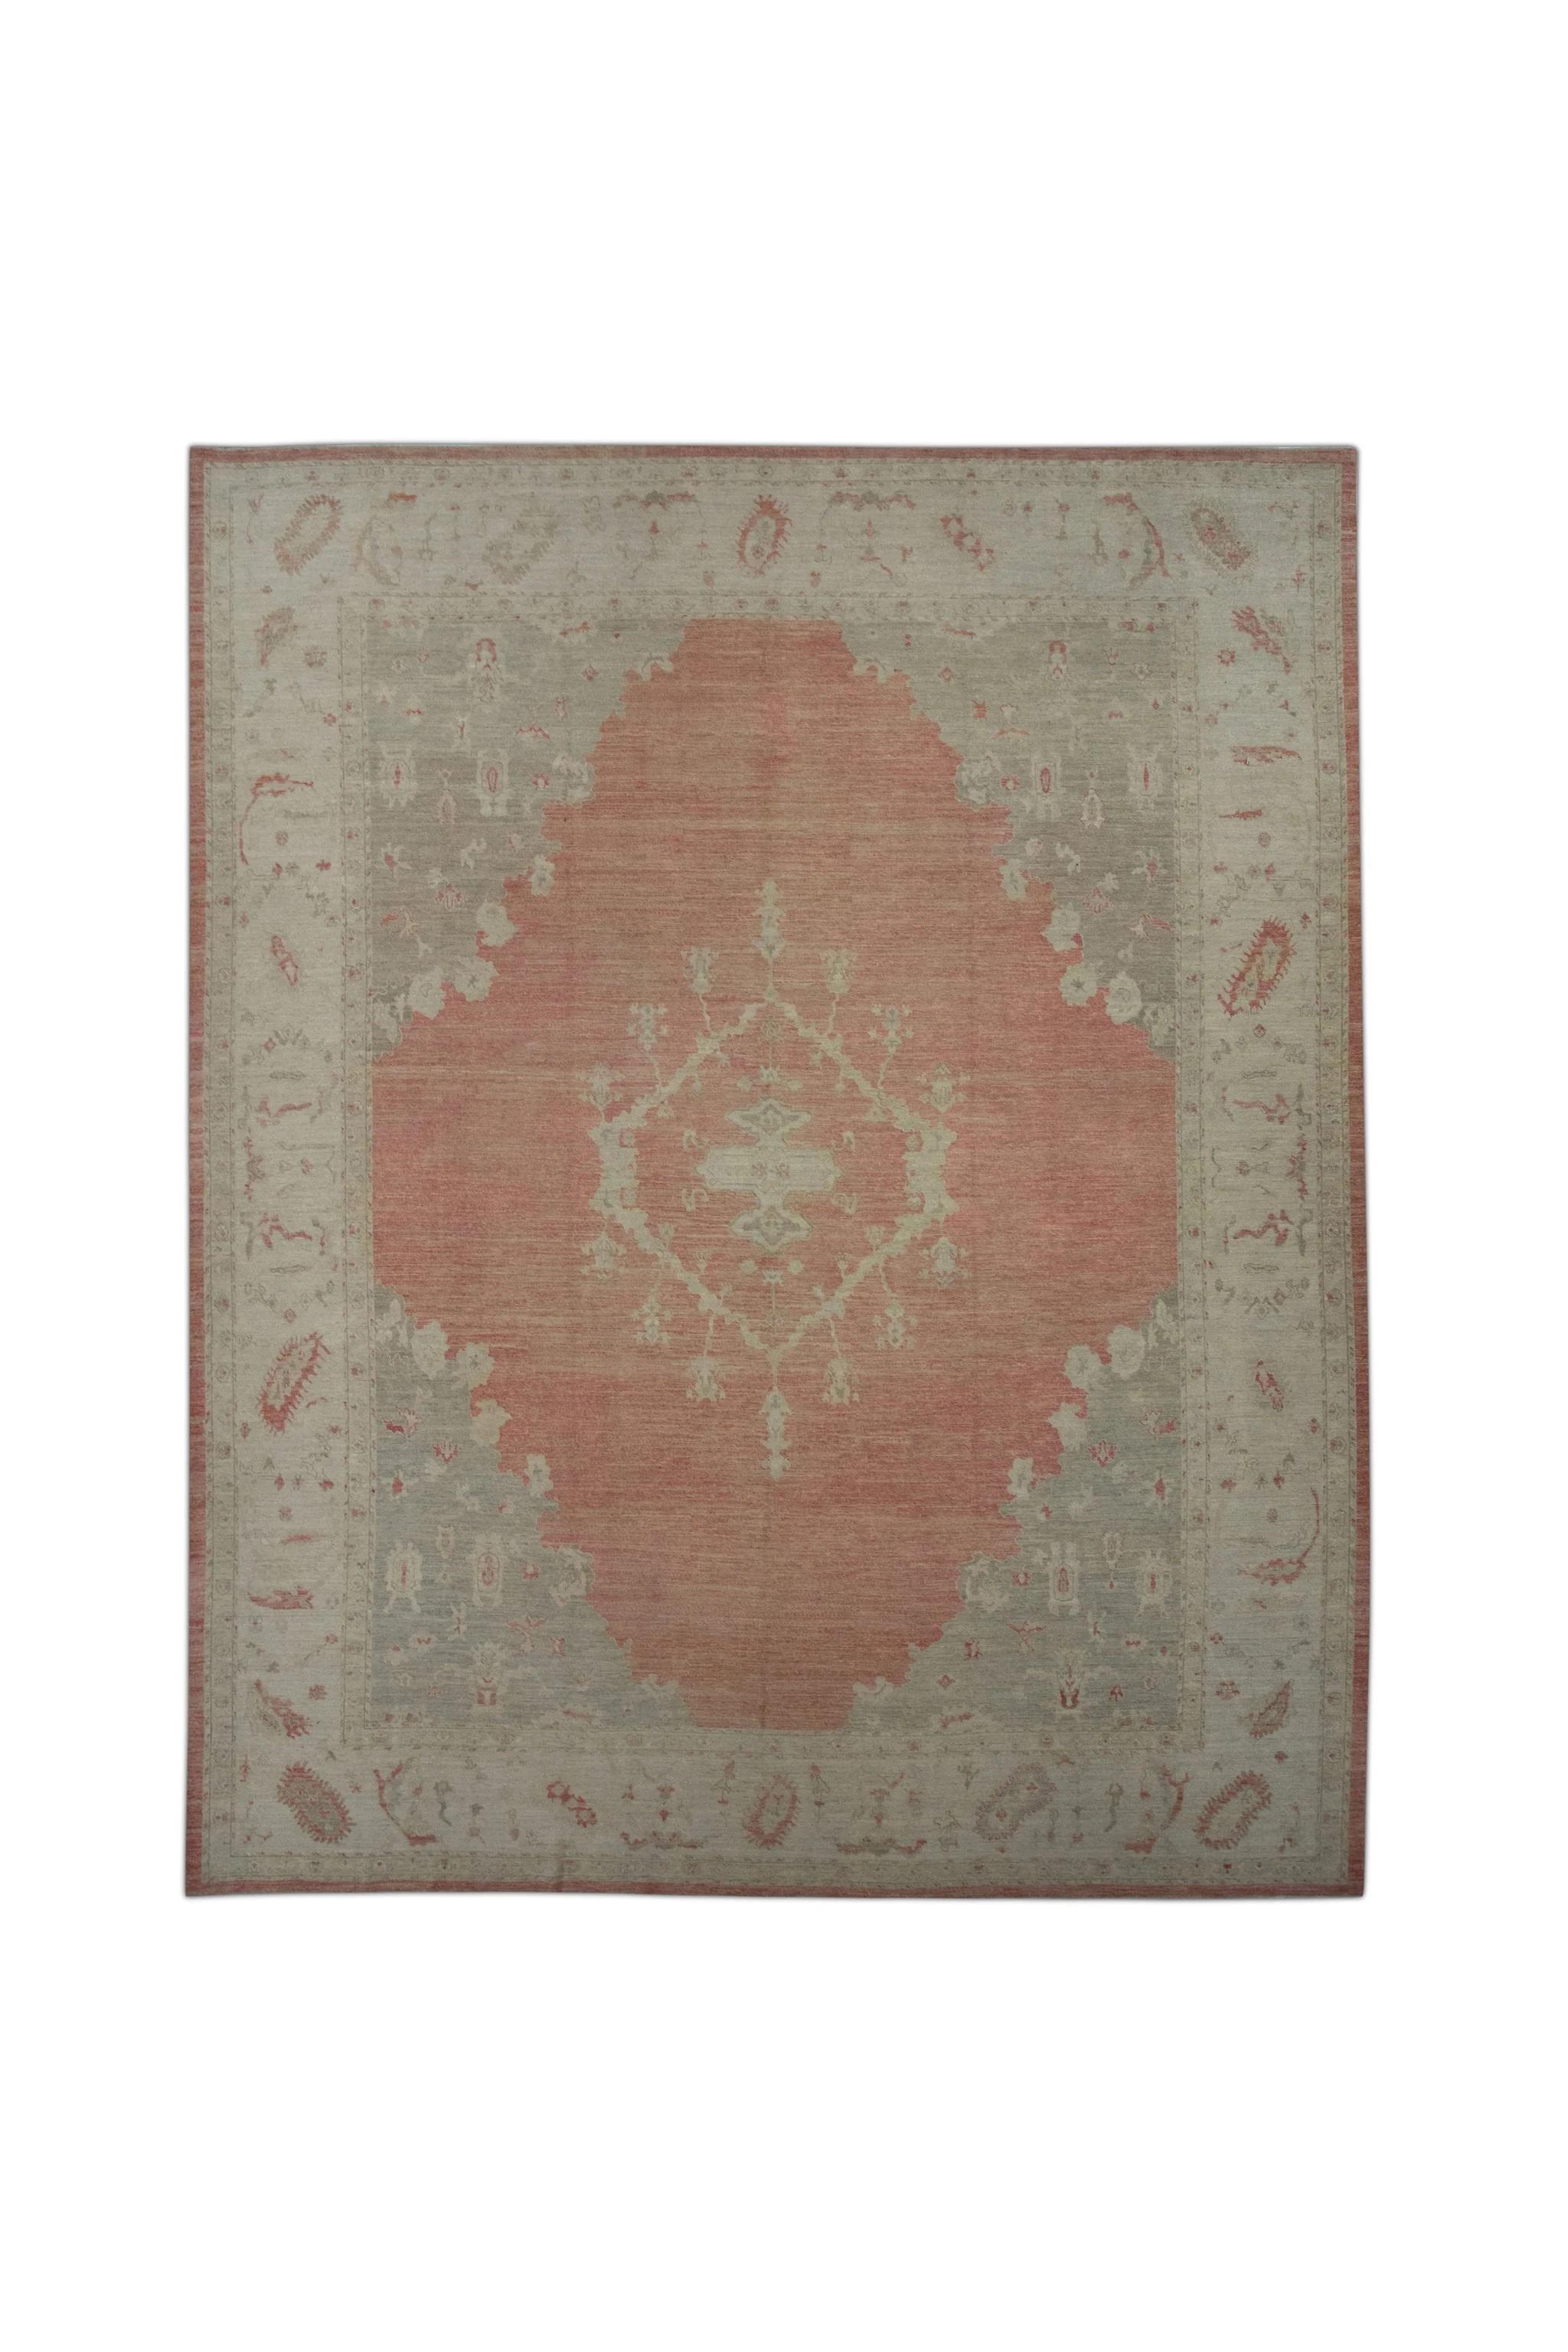 Beige & Red Turkish Finewoven Wool Oushak Rug 12'5" x 15'1" For Sale